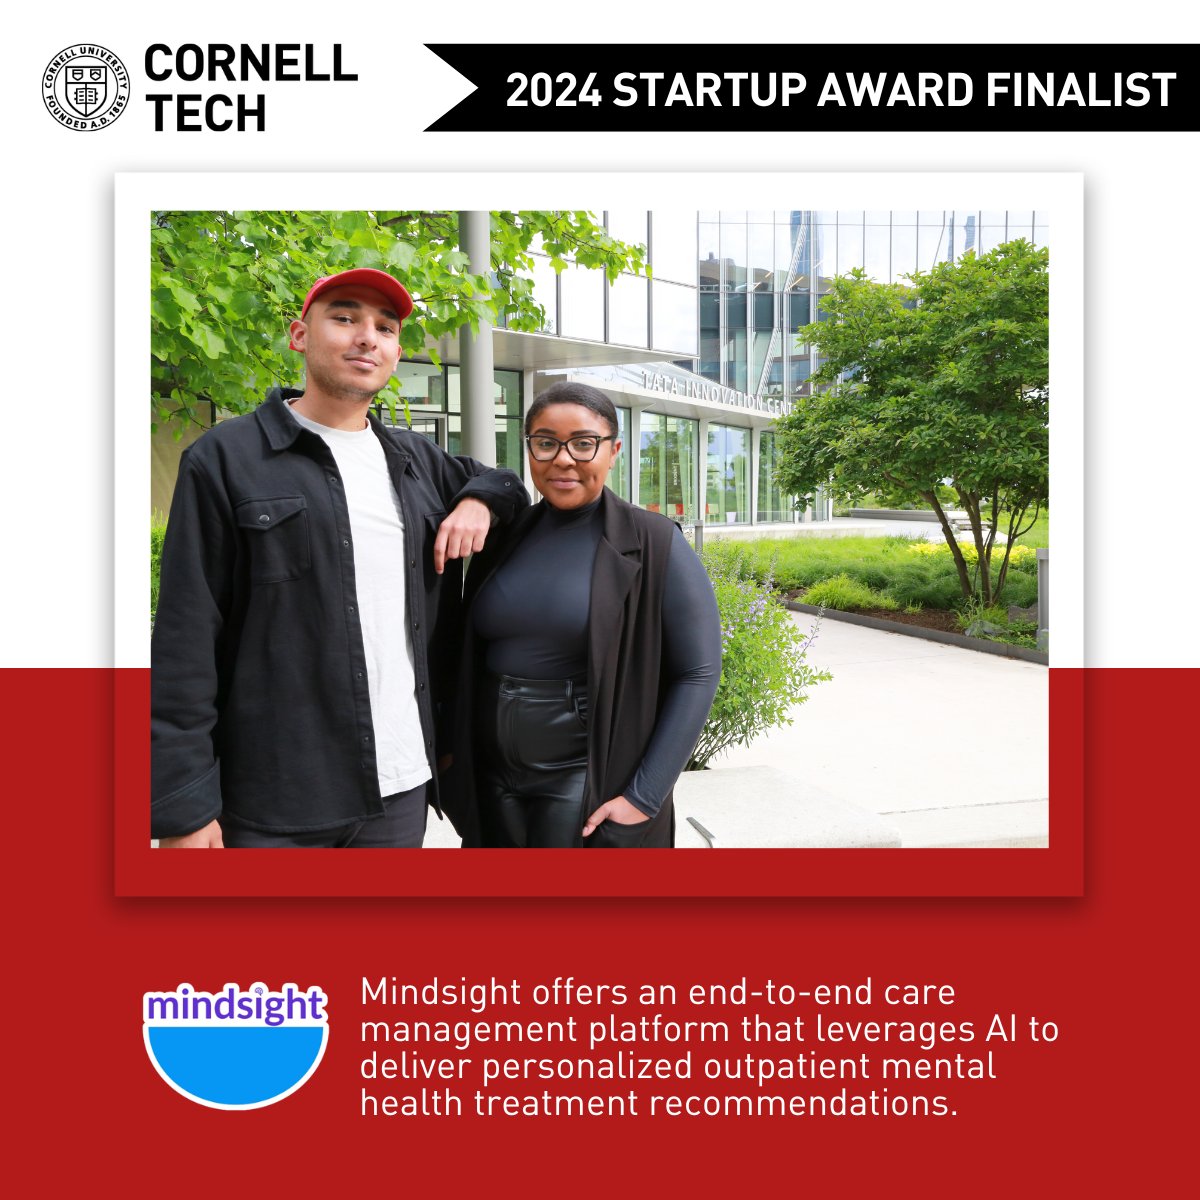 Announcing startup company Mindsight as a finalist in the 2024 #StartupAwards competition on May 17 at #CornellTech’s #OpenStudio! Mindsight offers end-to-end care management that utilizes AI to deliver personalized mental health treatment recommendations. bit.ly/3U5VXmH